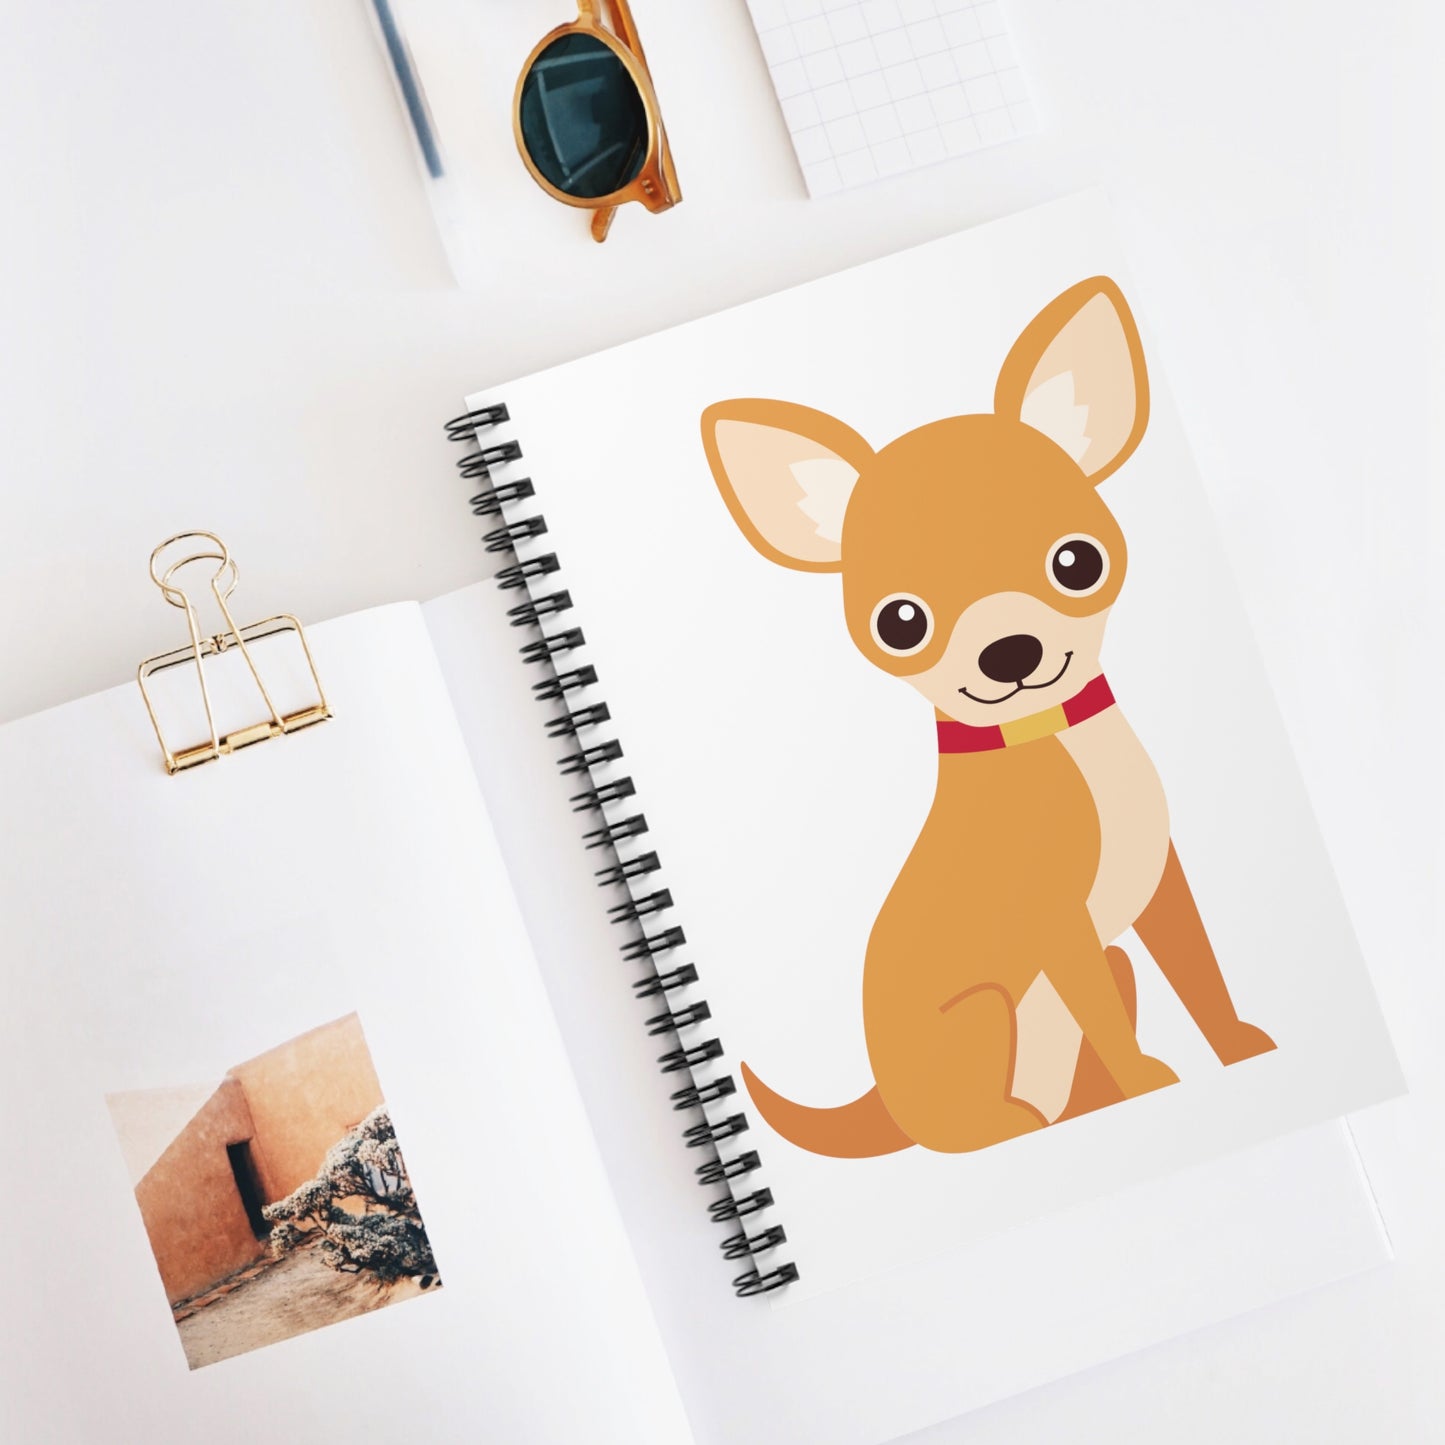 Happy Chihuahua: Spiral Notebook - Log Books - Journals - Diaries - and More Custom Printed by TheGlassyLass